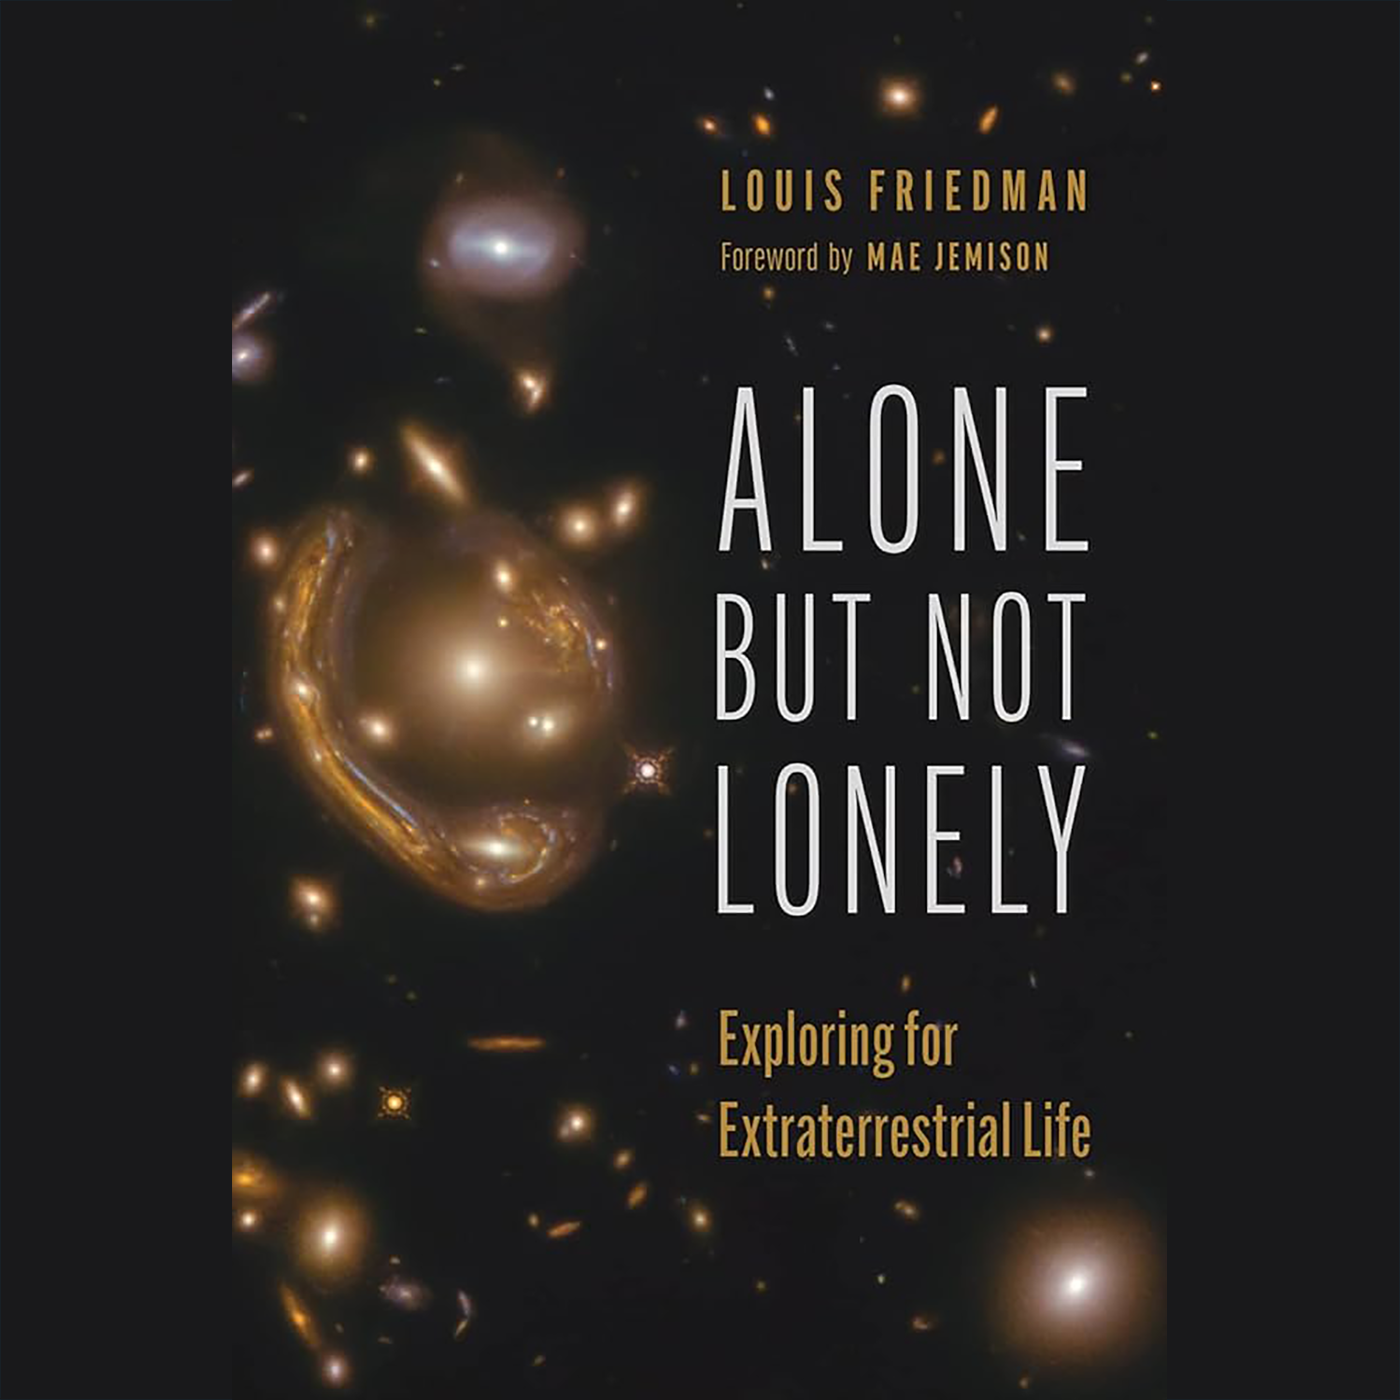 Alone but not lonely with Louis Friedman